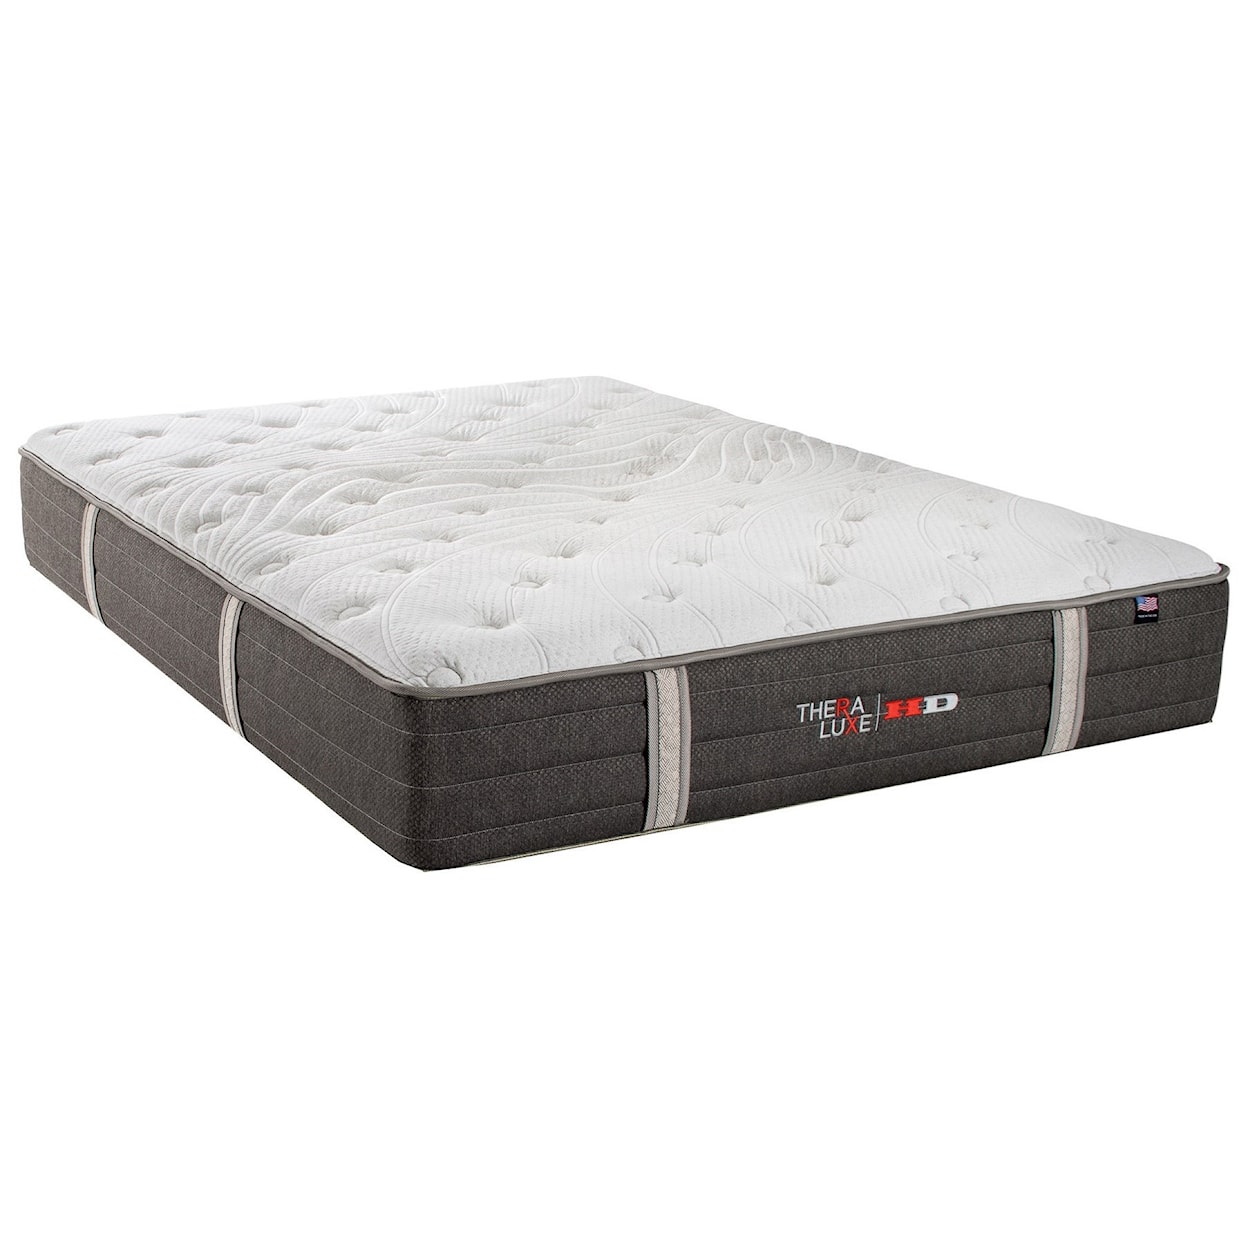 Therapedic Theraluxe Aspen Cal King Firm Pocketed Coil Mattress